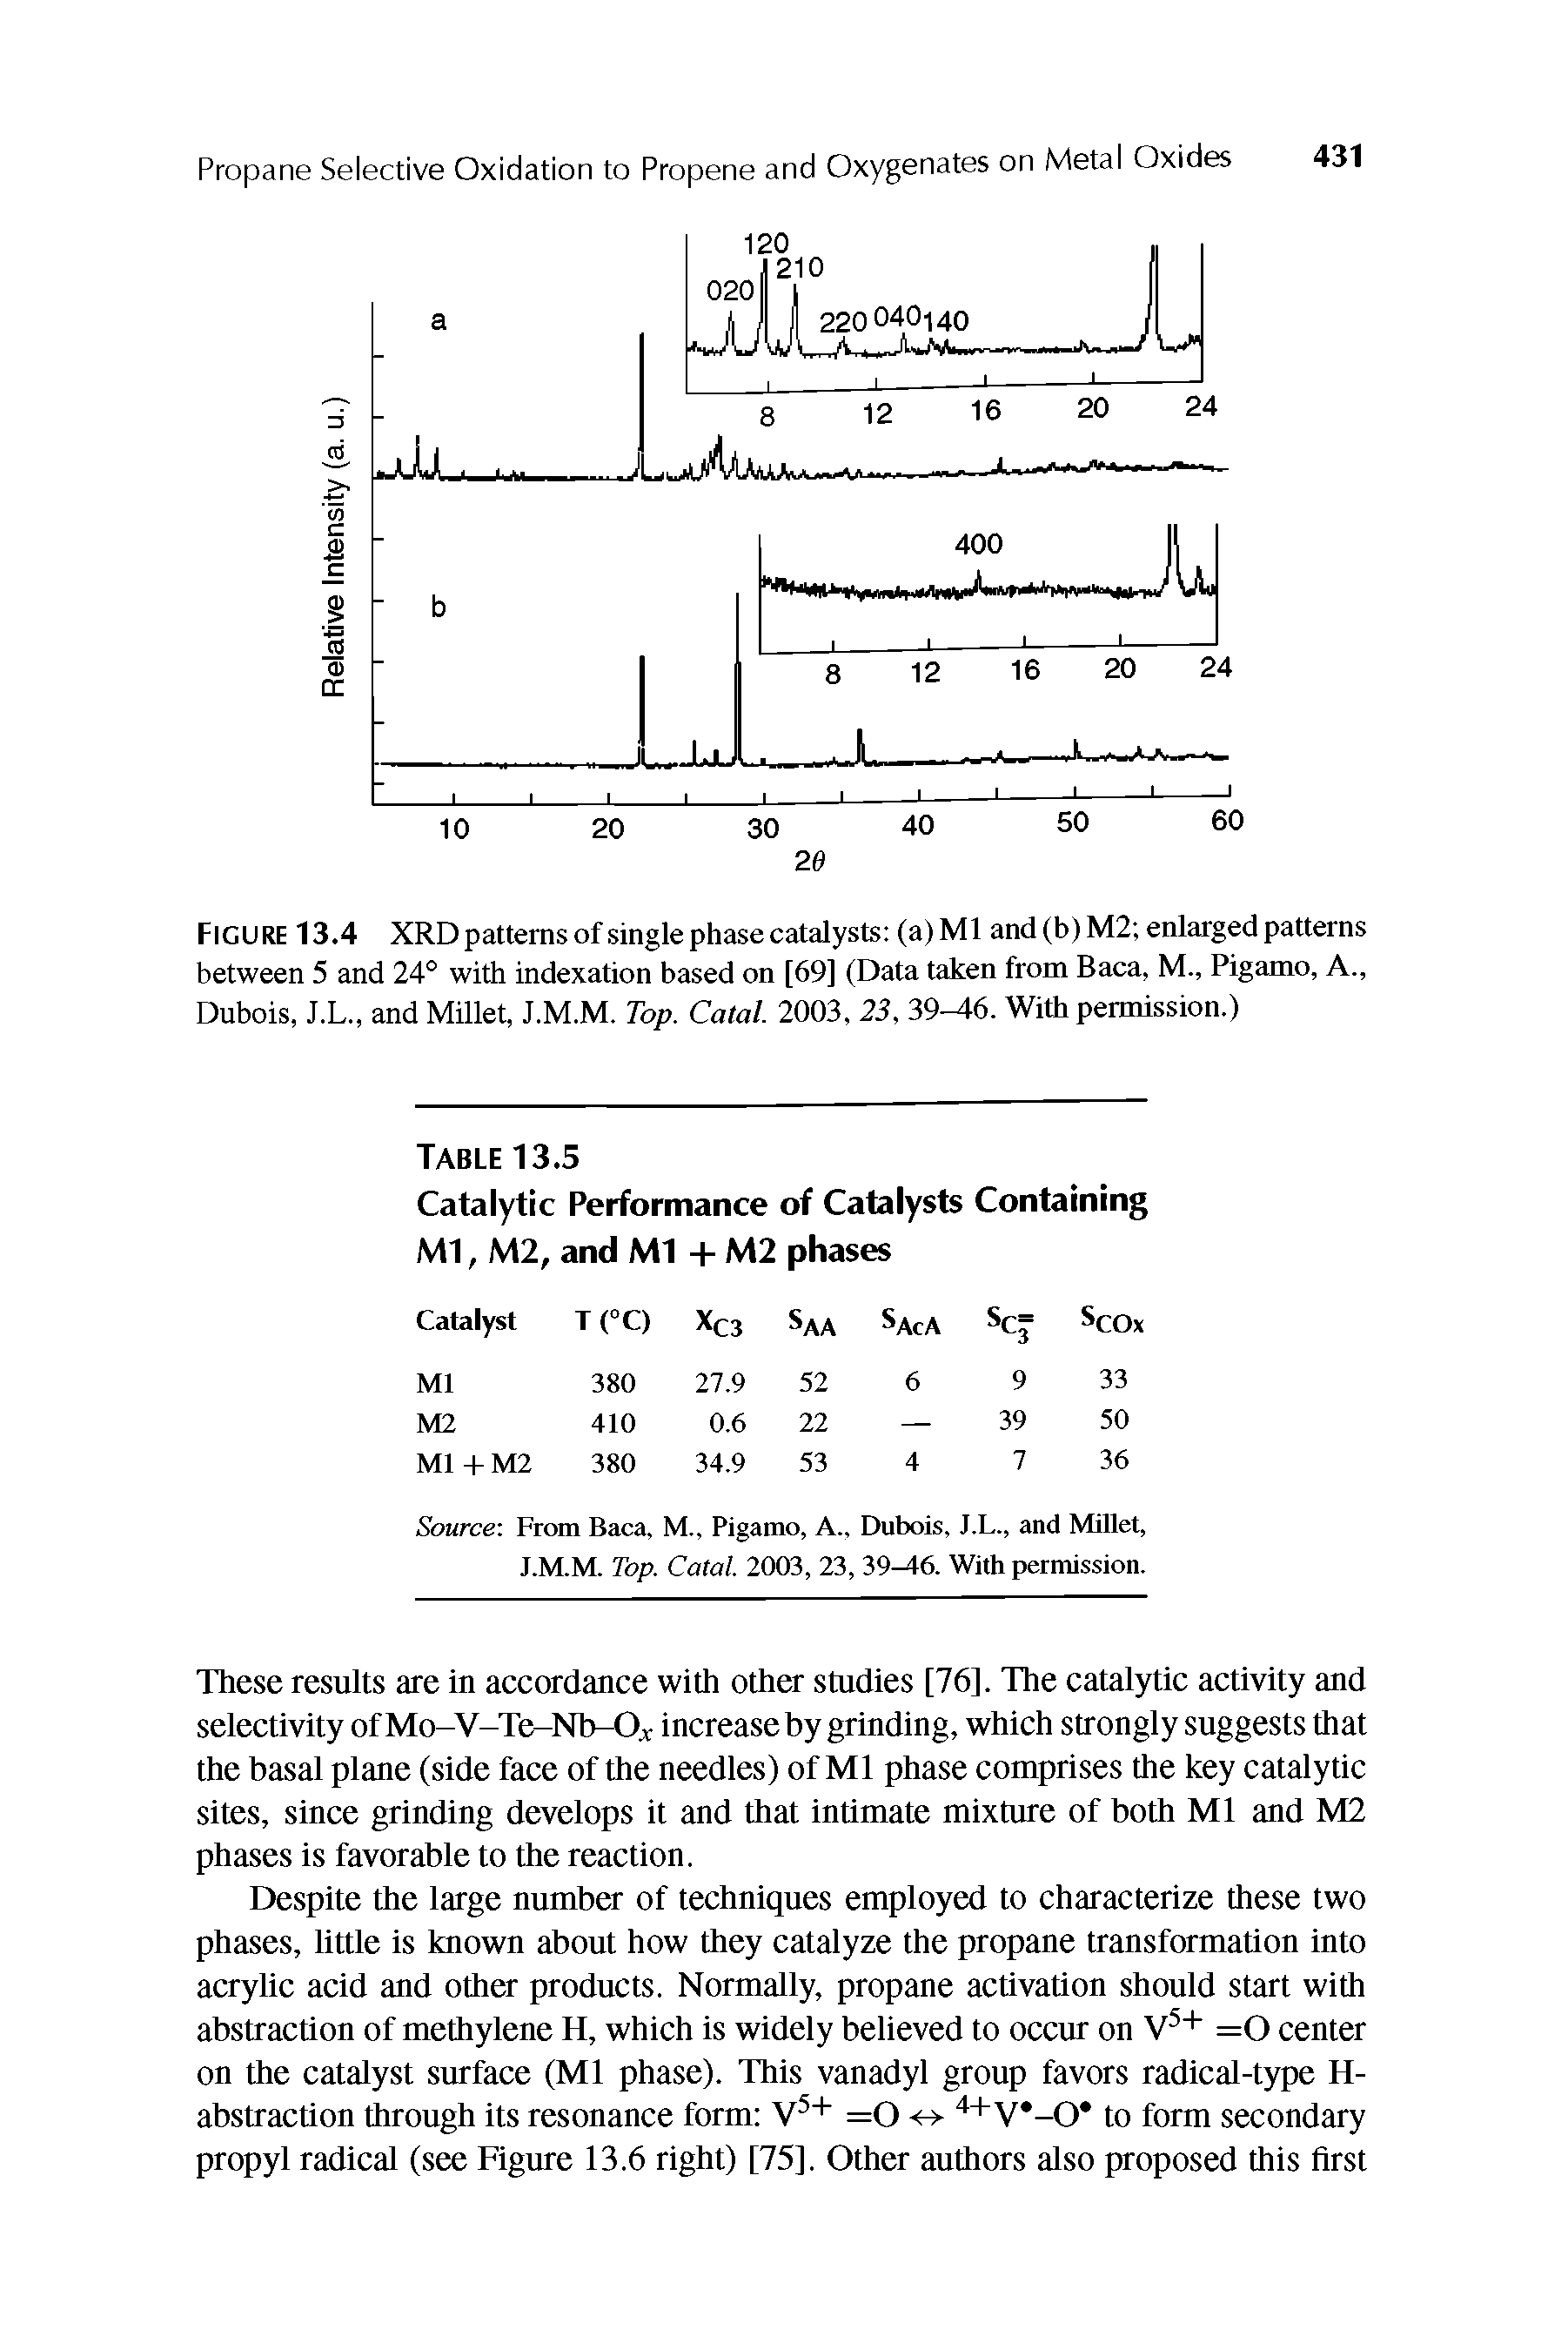 Figure 13.4 XRD patterns of single phase catalysts (a)Ml and (b) M2 enlarged patterns between 5 and 24° with indexation based on [69] (Data taken from Baca, M., Pigamo, A., Dubois, J.L., and Millet, J.M.M. Top. Catal. 2003, 23, 39-46. With permission.)...